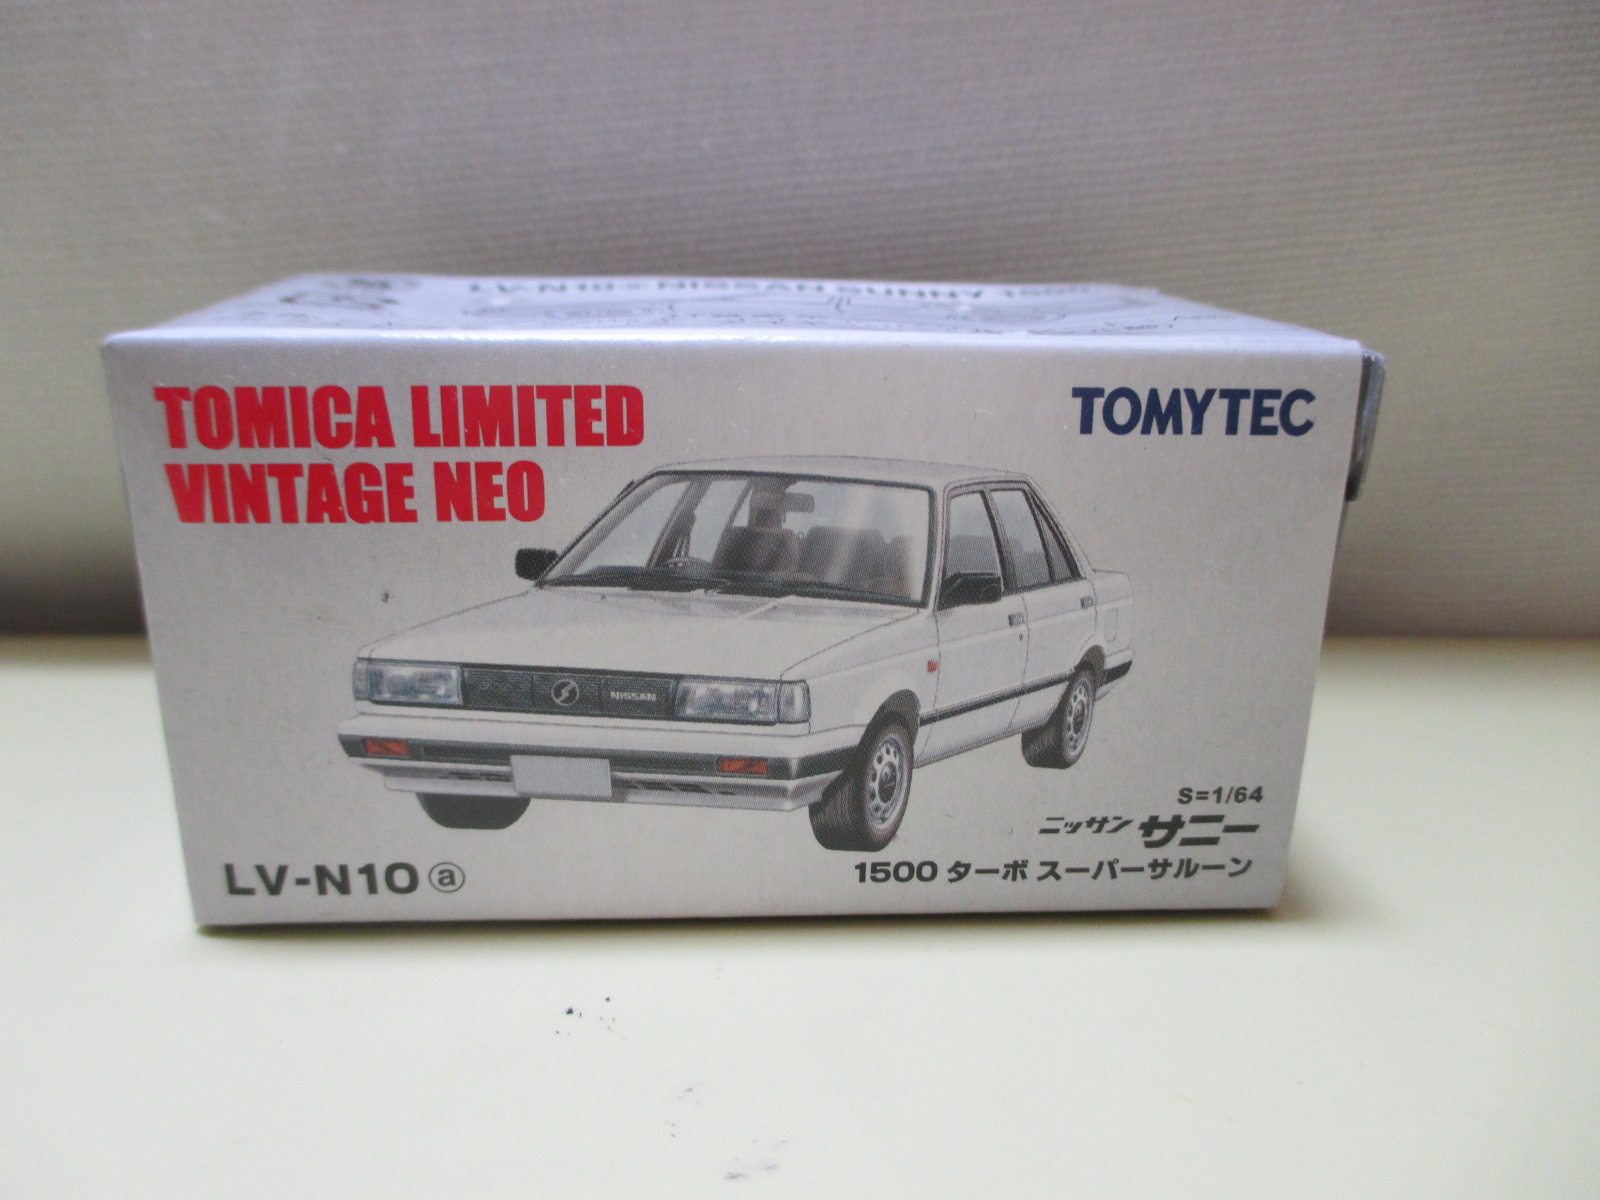 Tomica Limited Vintage Neo LV-N10a 1/64 Nissan Sunny 1500 Turbo Super Saloon - Picture 1 of 1